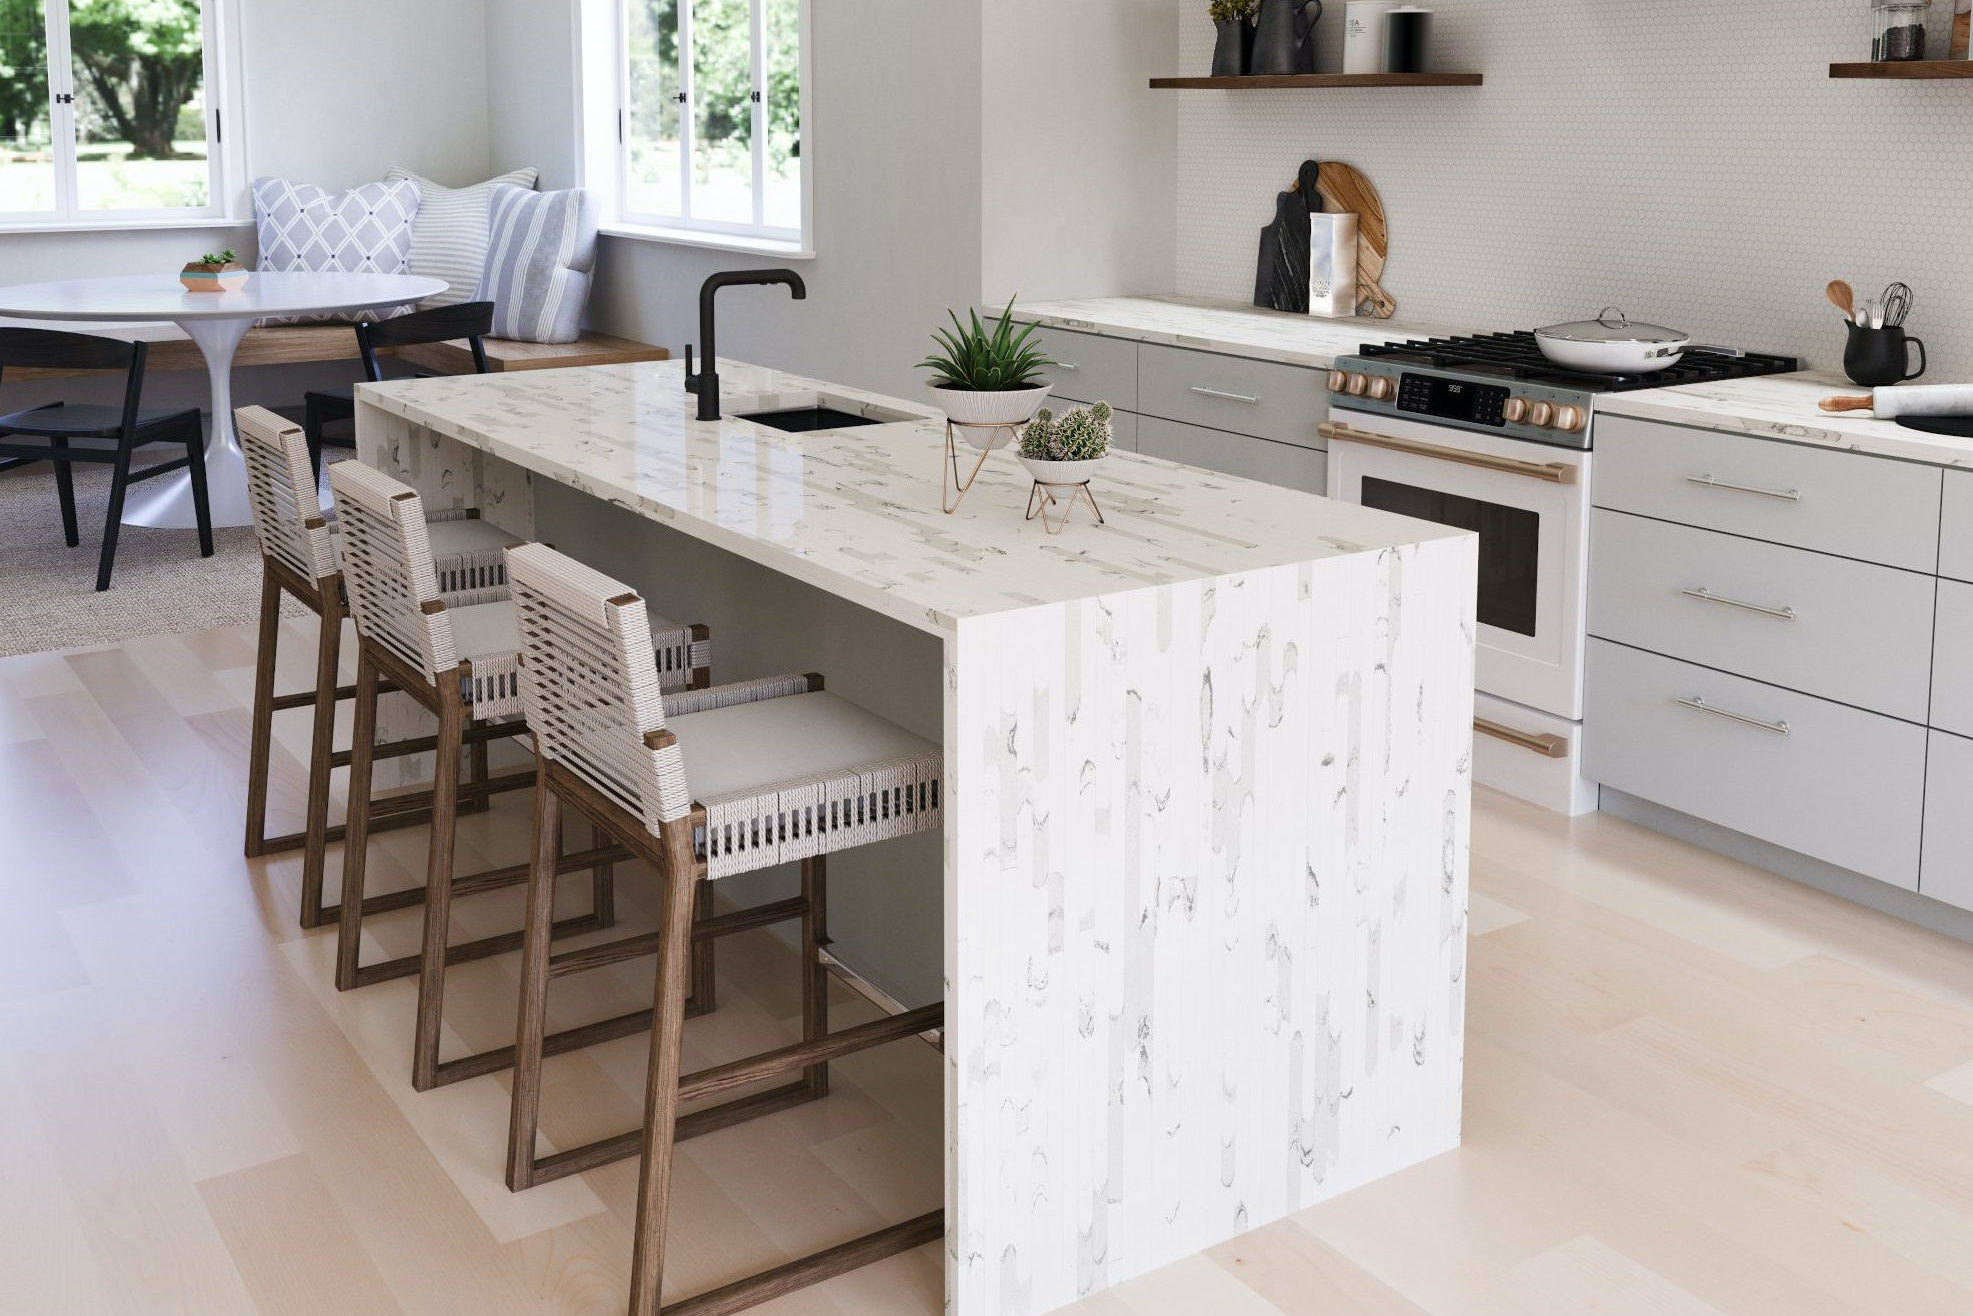 Brittanicca Block Cambria Quartz Kitchen Countertops with White Wood Cabinets, Wood Floors, and Bar Stools